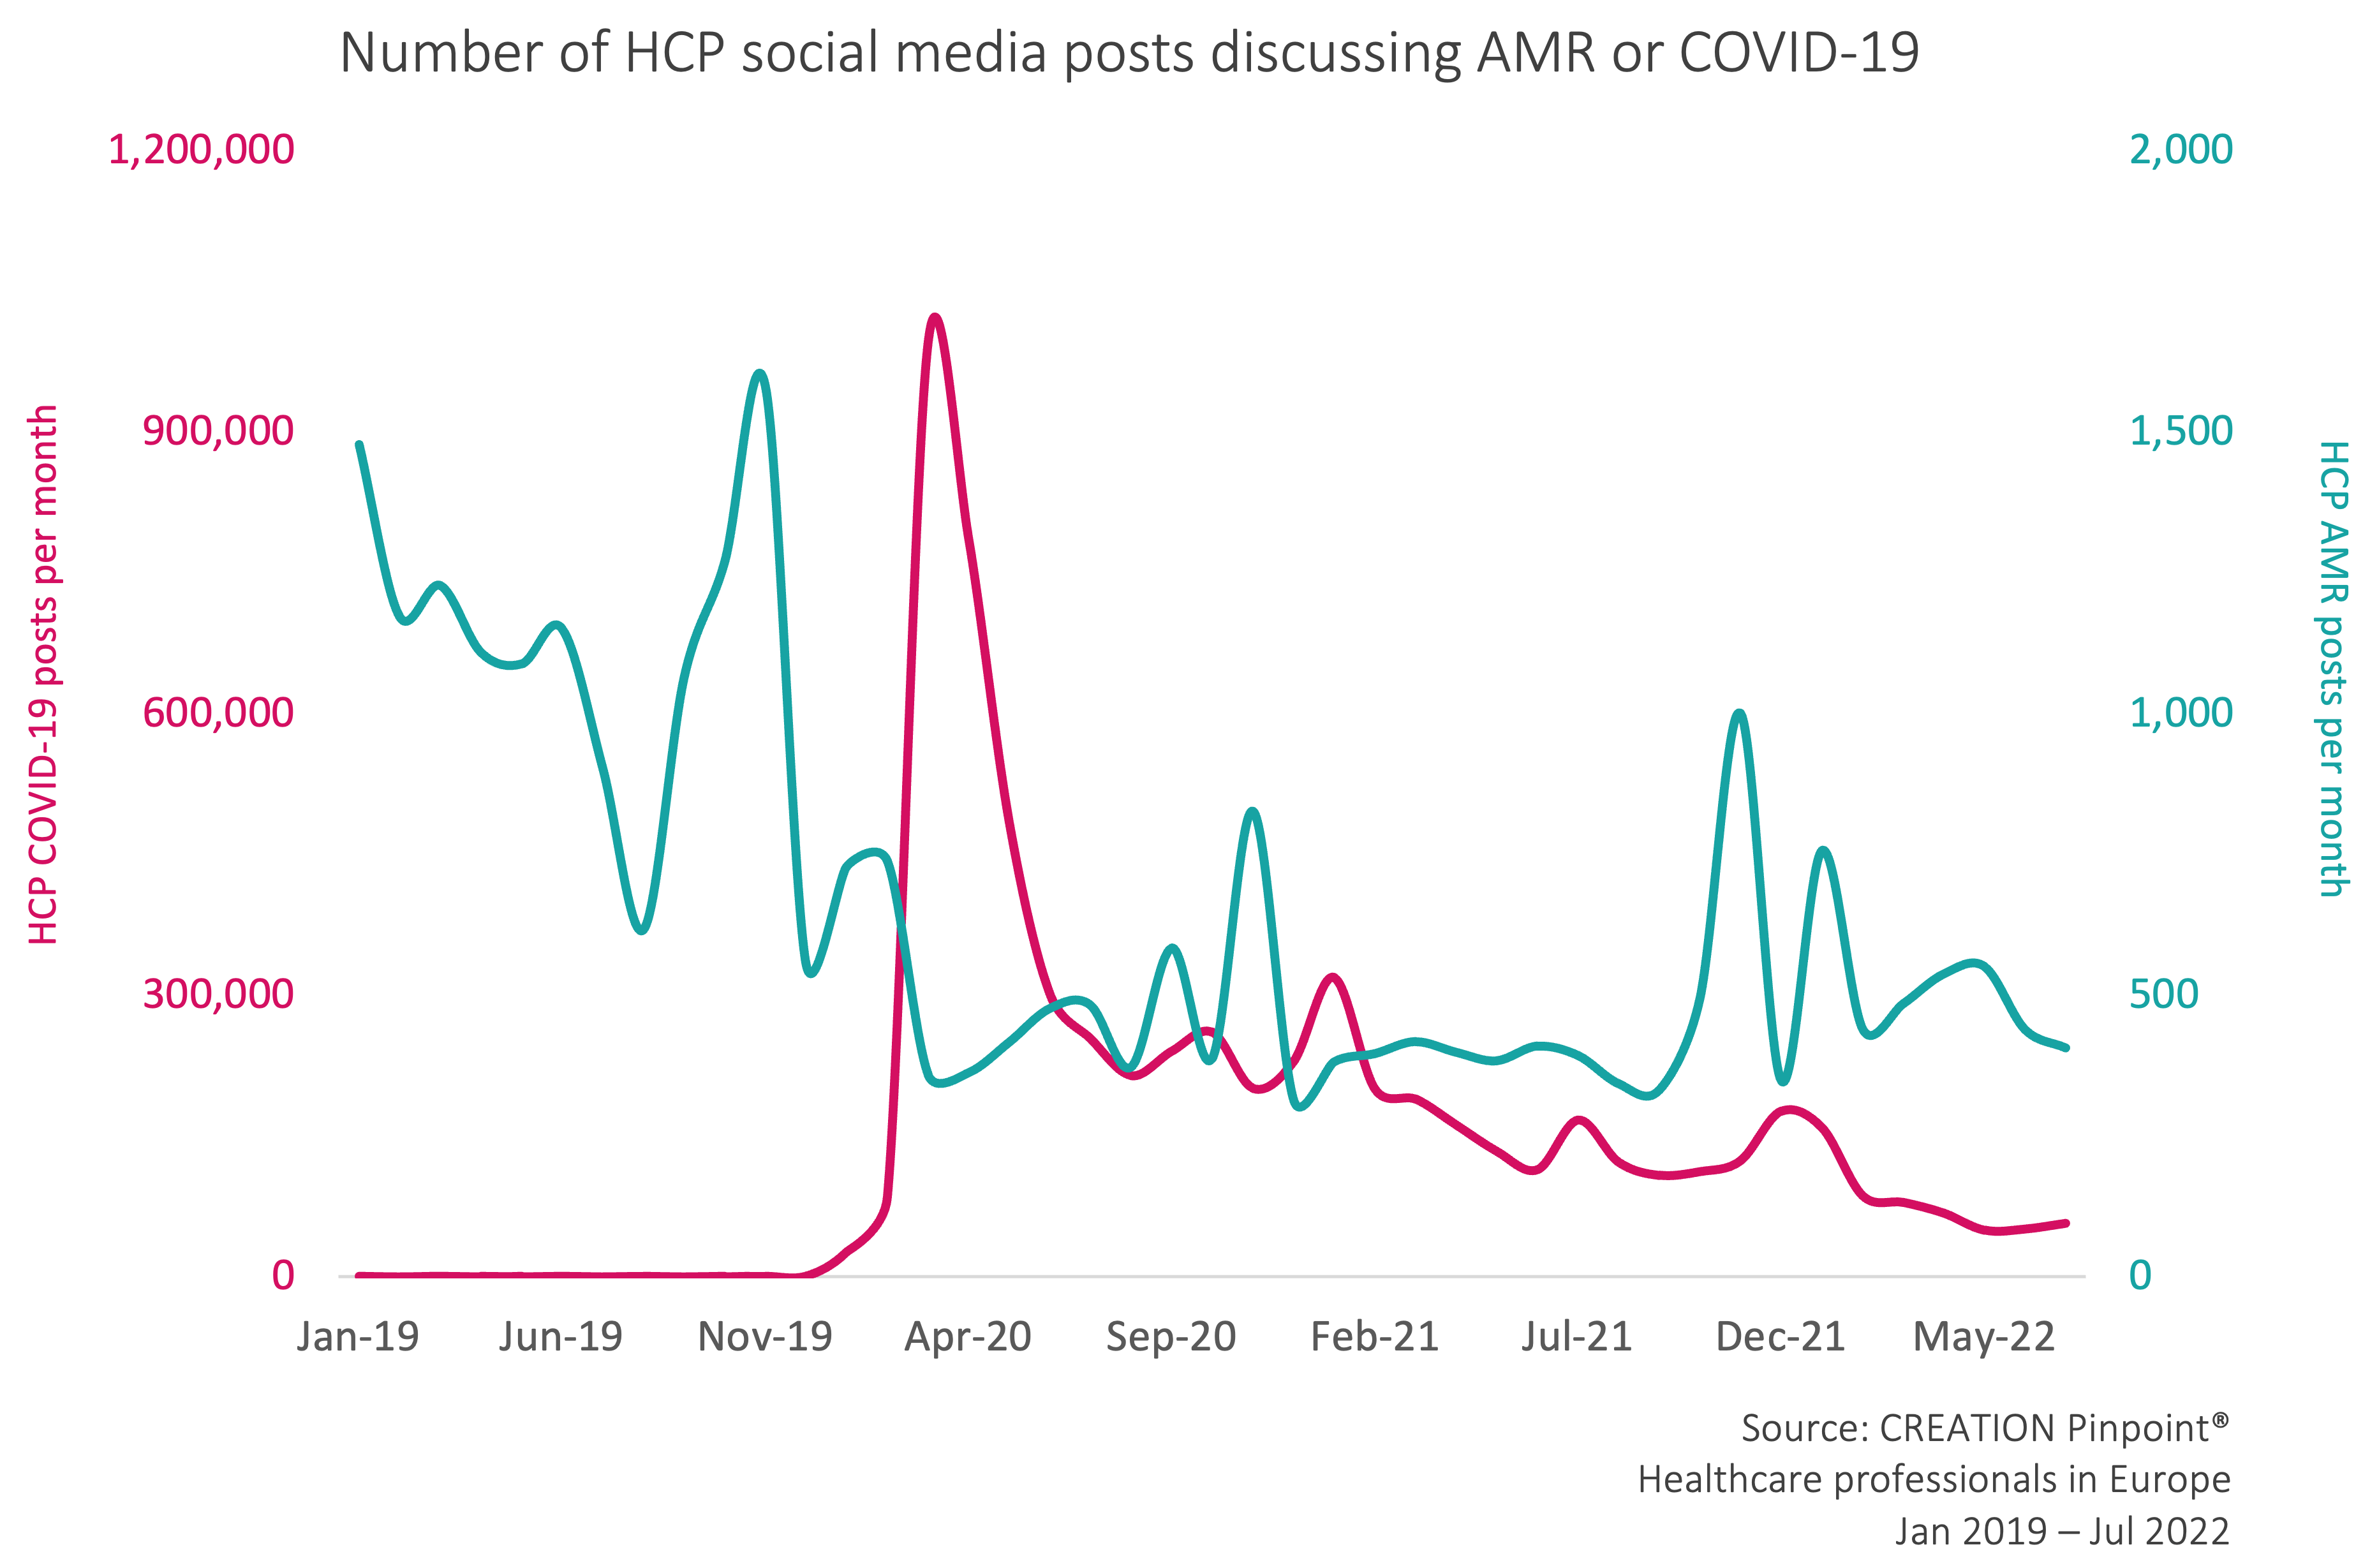 A graph showing the number of HCP social media posts discussing AMR